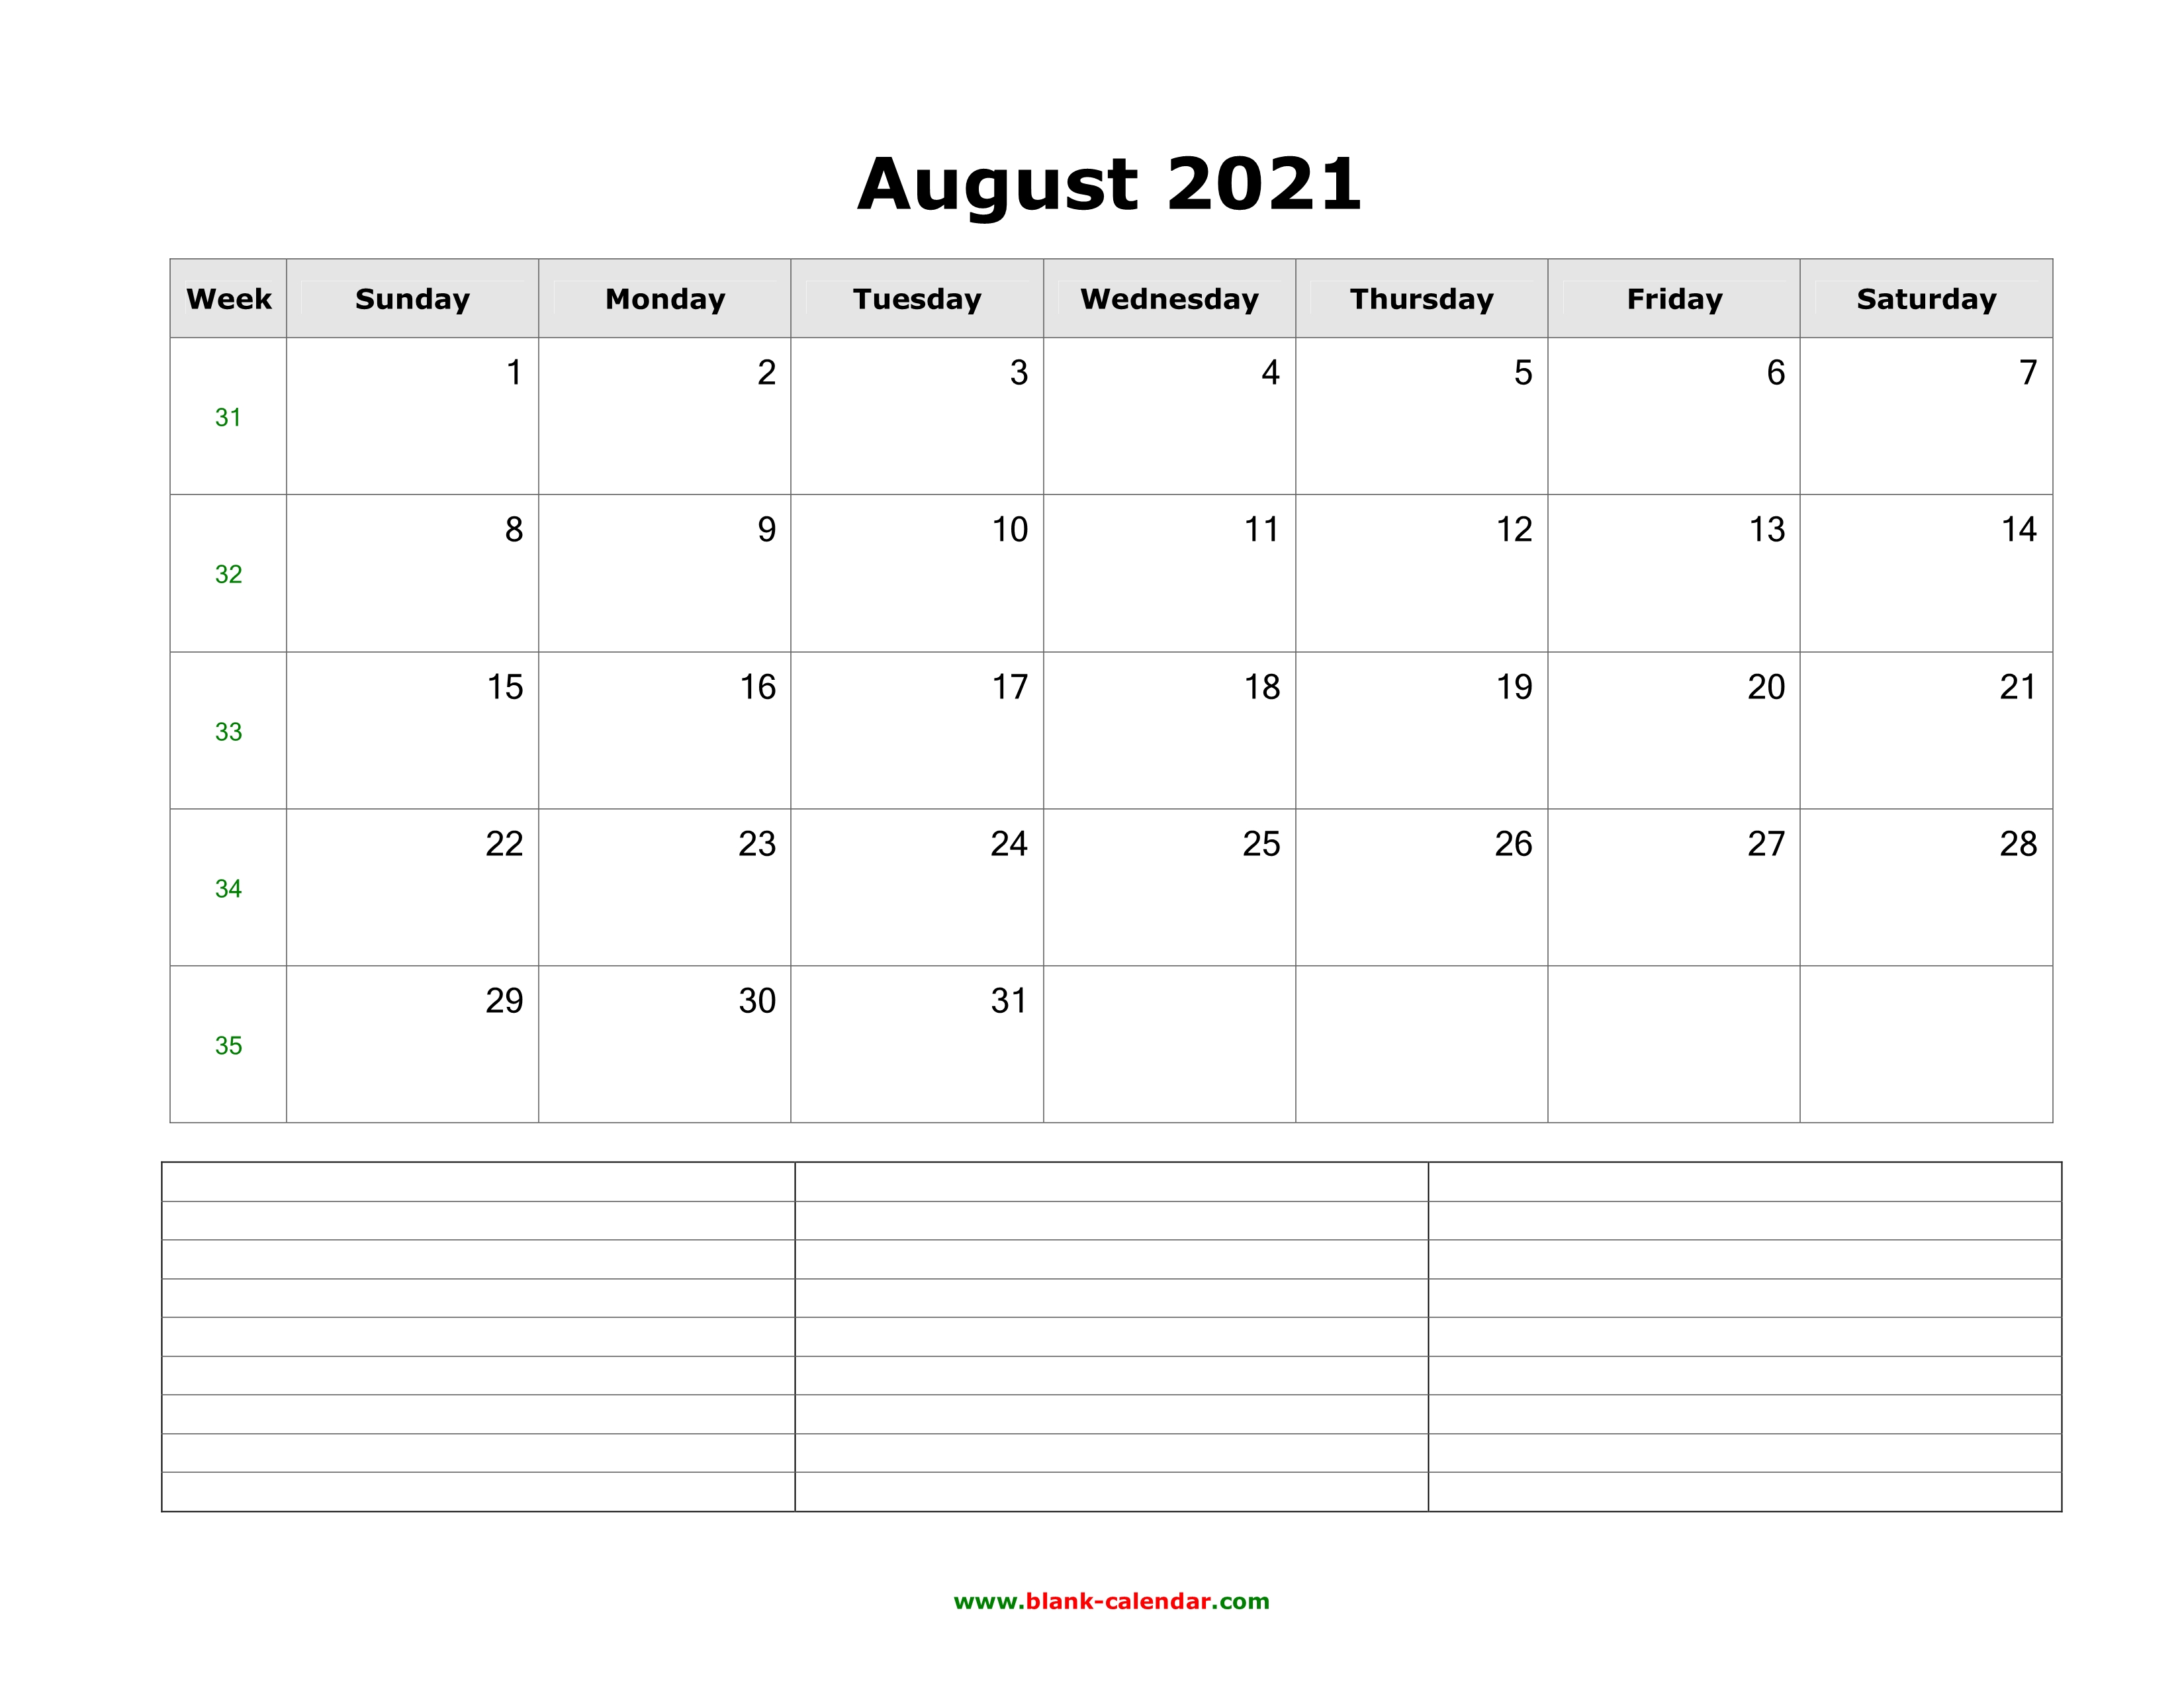 Download August 2021 Blank Calendar with Space for Notes (horizontal)